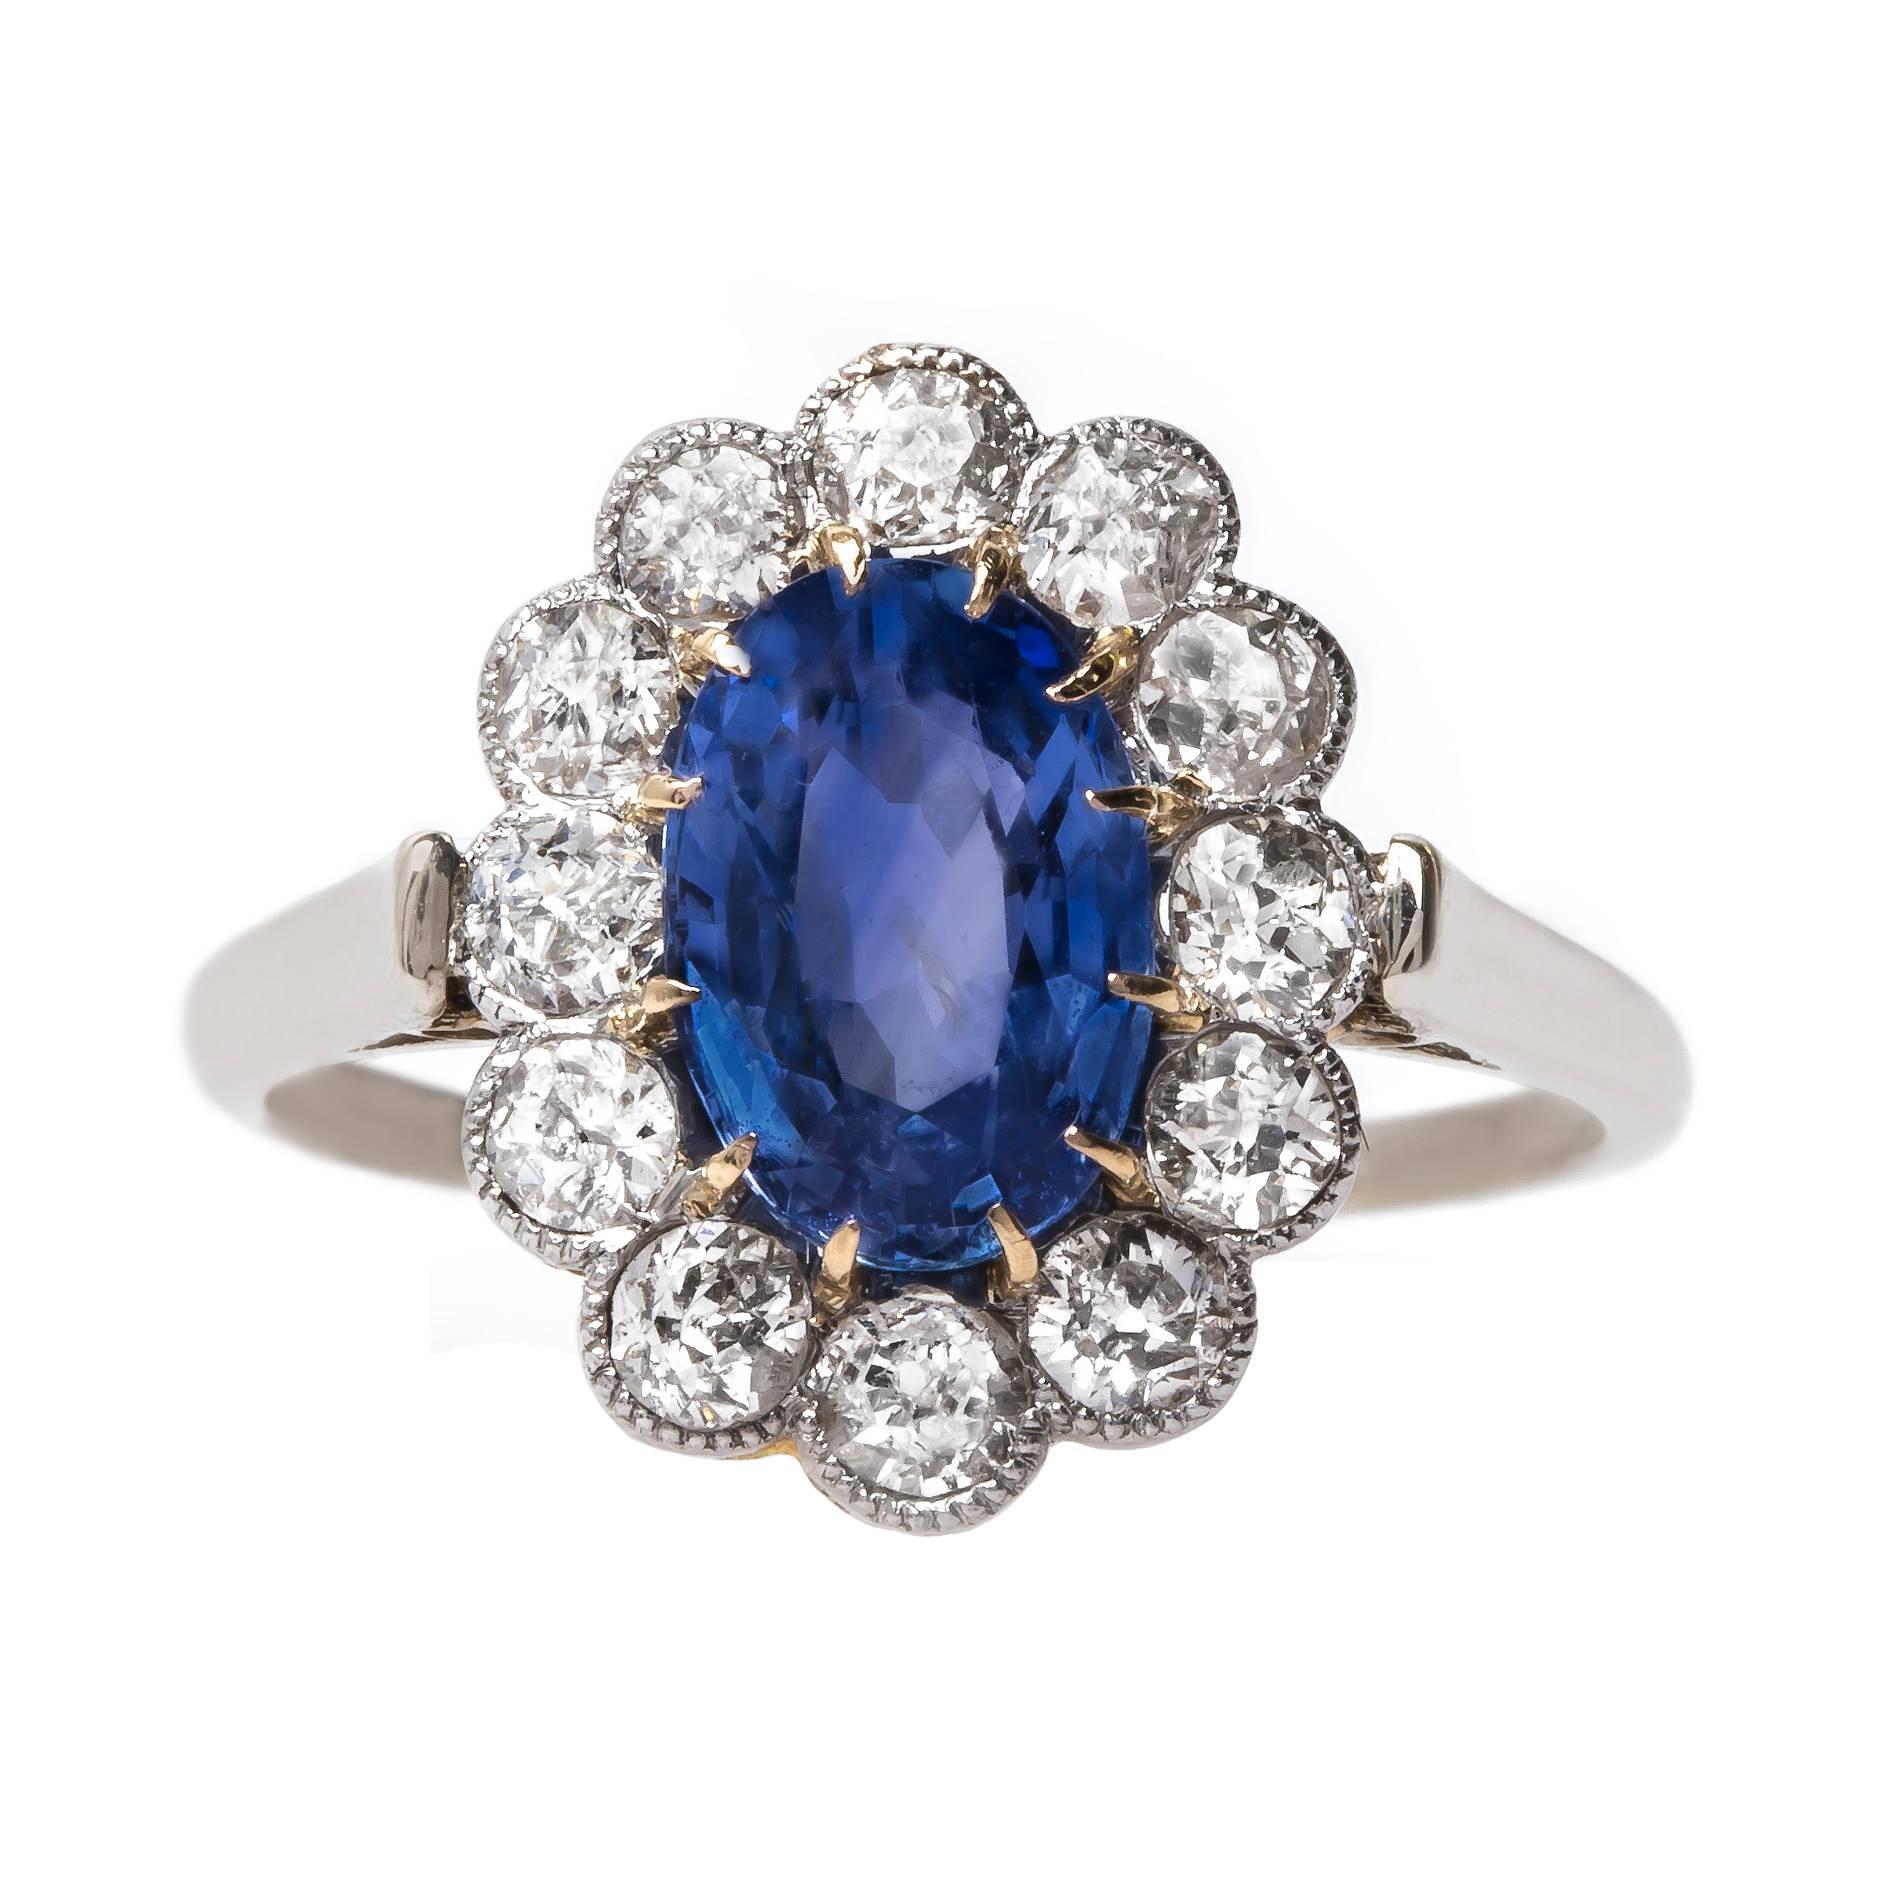 Exceptional Victorian Engagement Ring with Unheated Sapphire and Diamond Halo